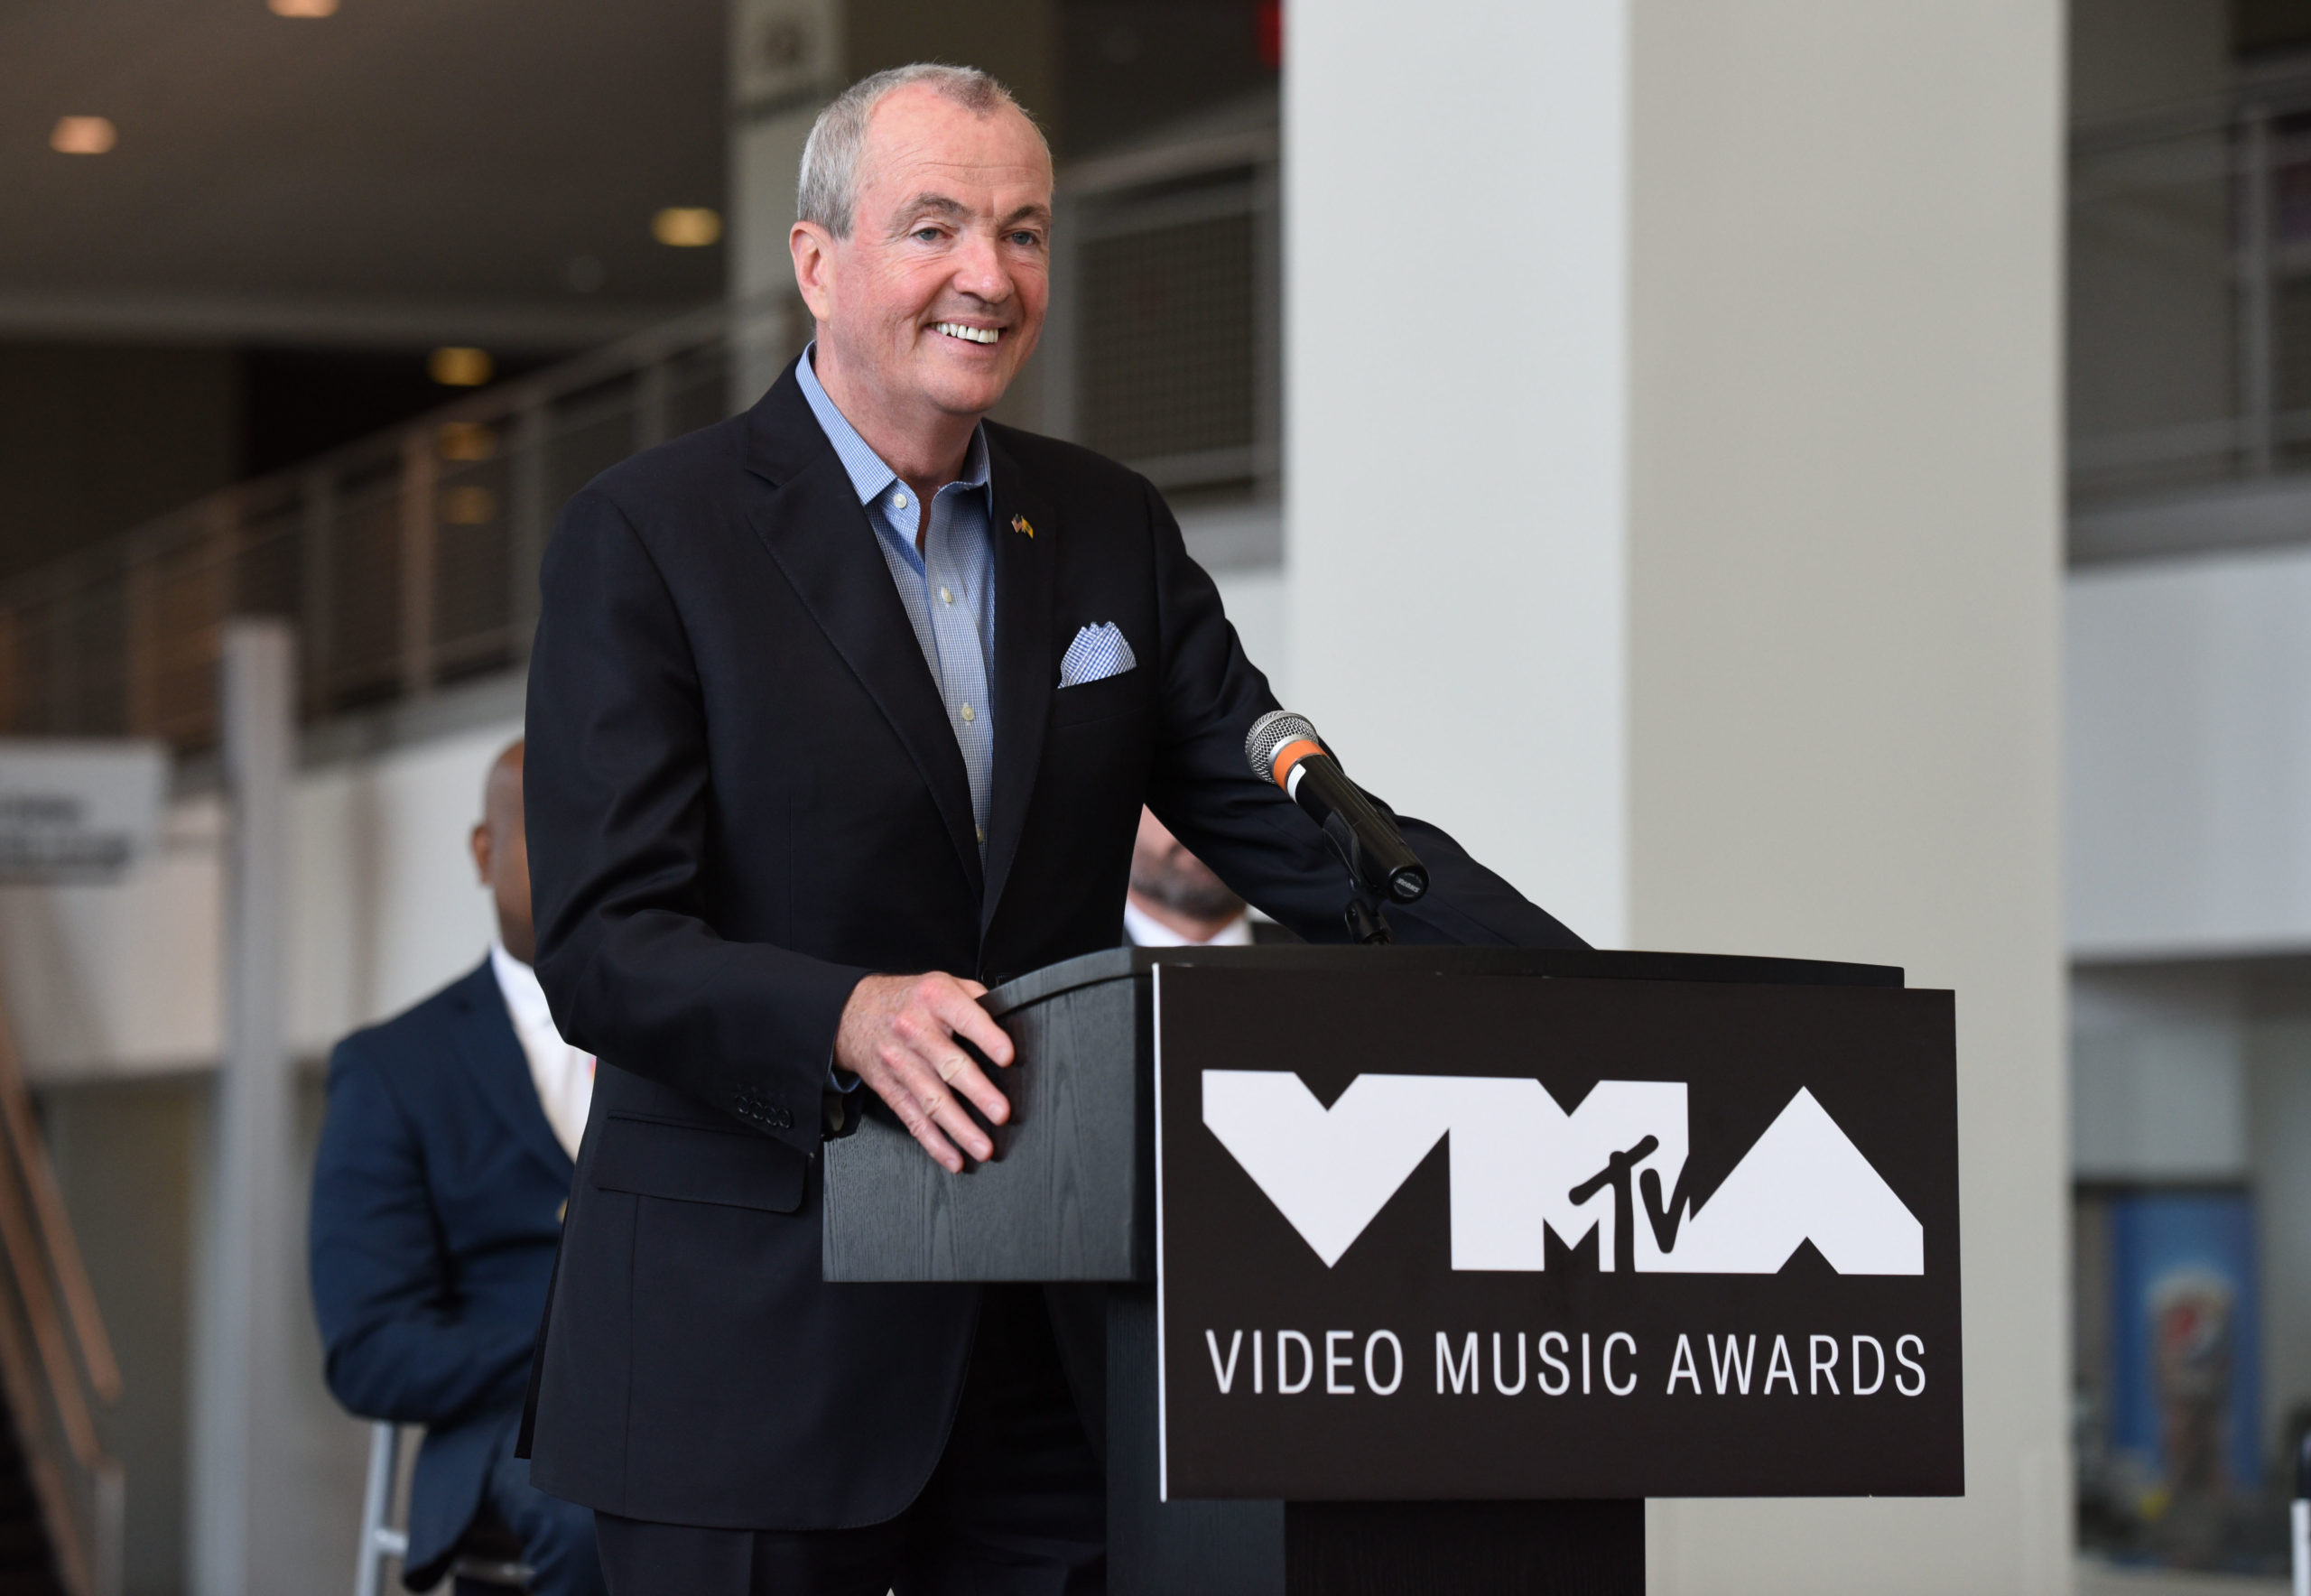 NEWARK, NEW JERSEY - MAY 06: Governor, State of New Jersey, Hon. Phil Murphy speaks during MTV “VMAs” Press Conference at Prudential Center Plaza on May 06, 2019 in Newark, New Jersey. (Bryan Bedder/Getty Images for MTV)